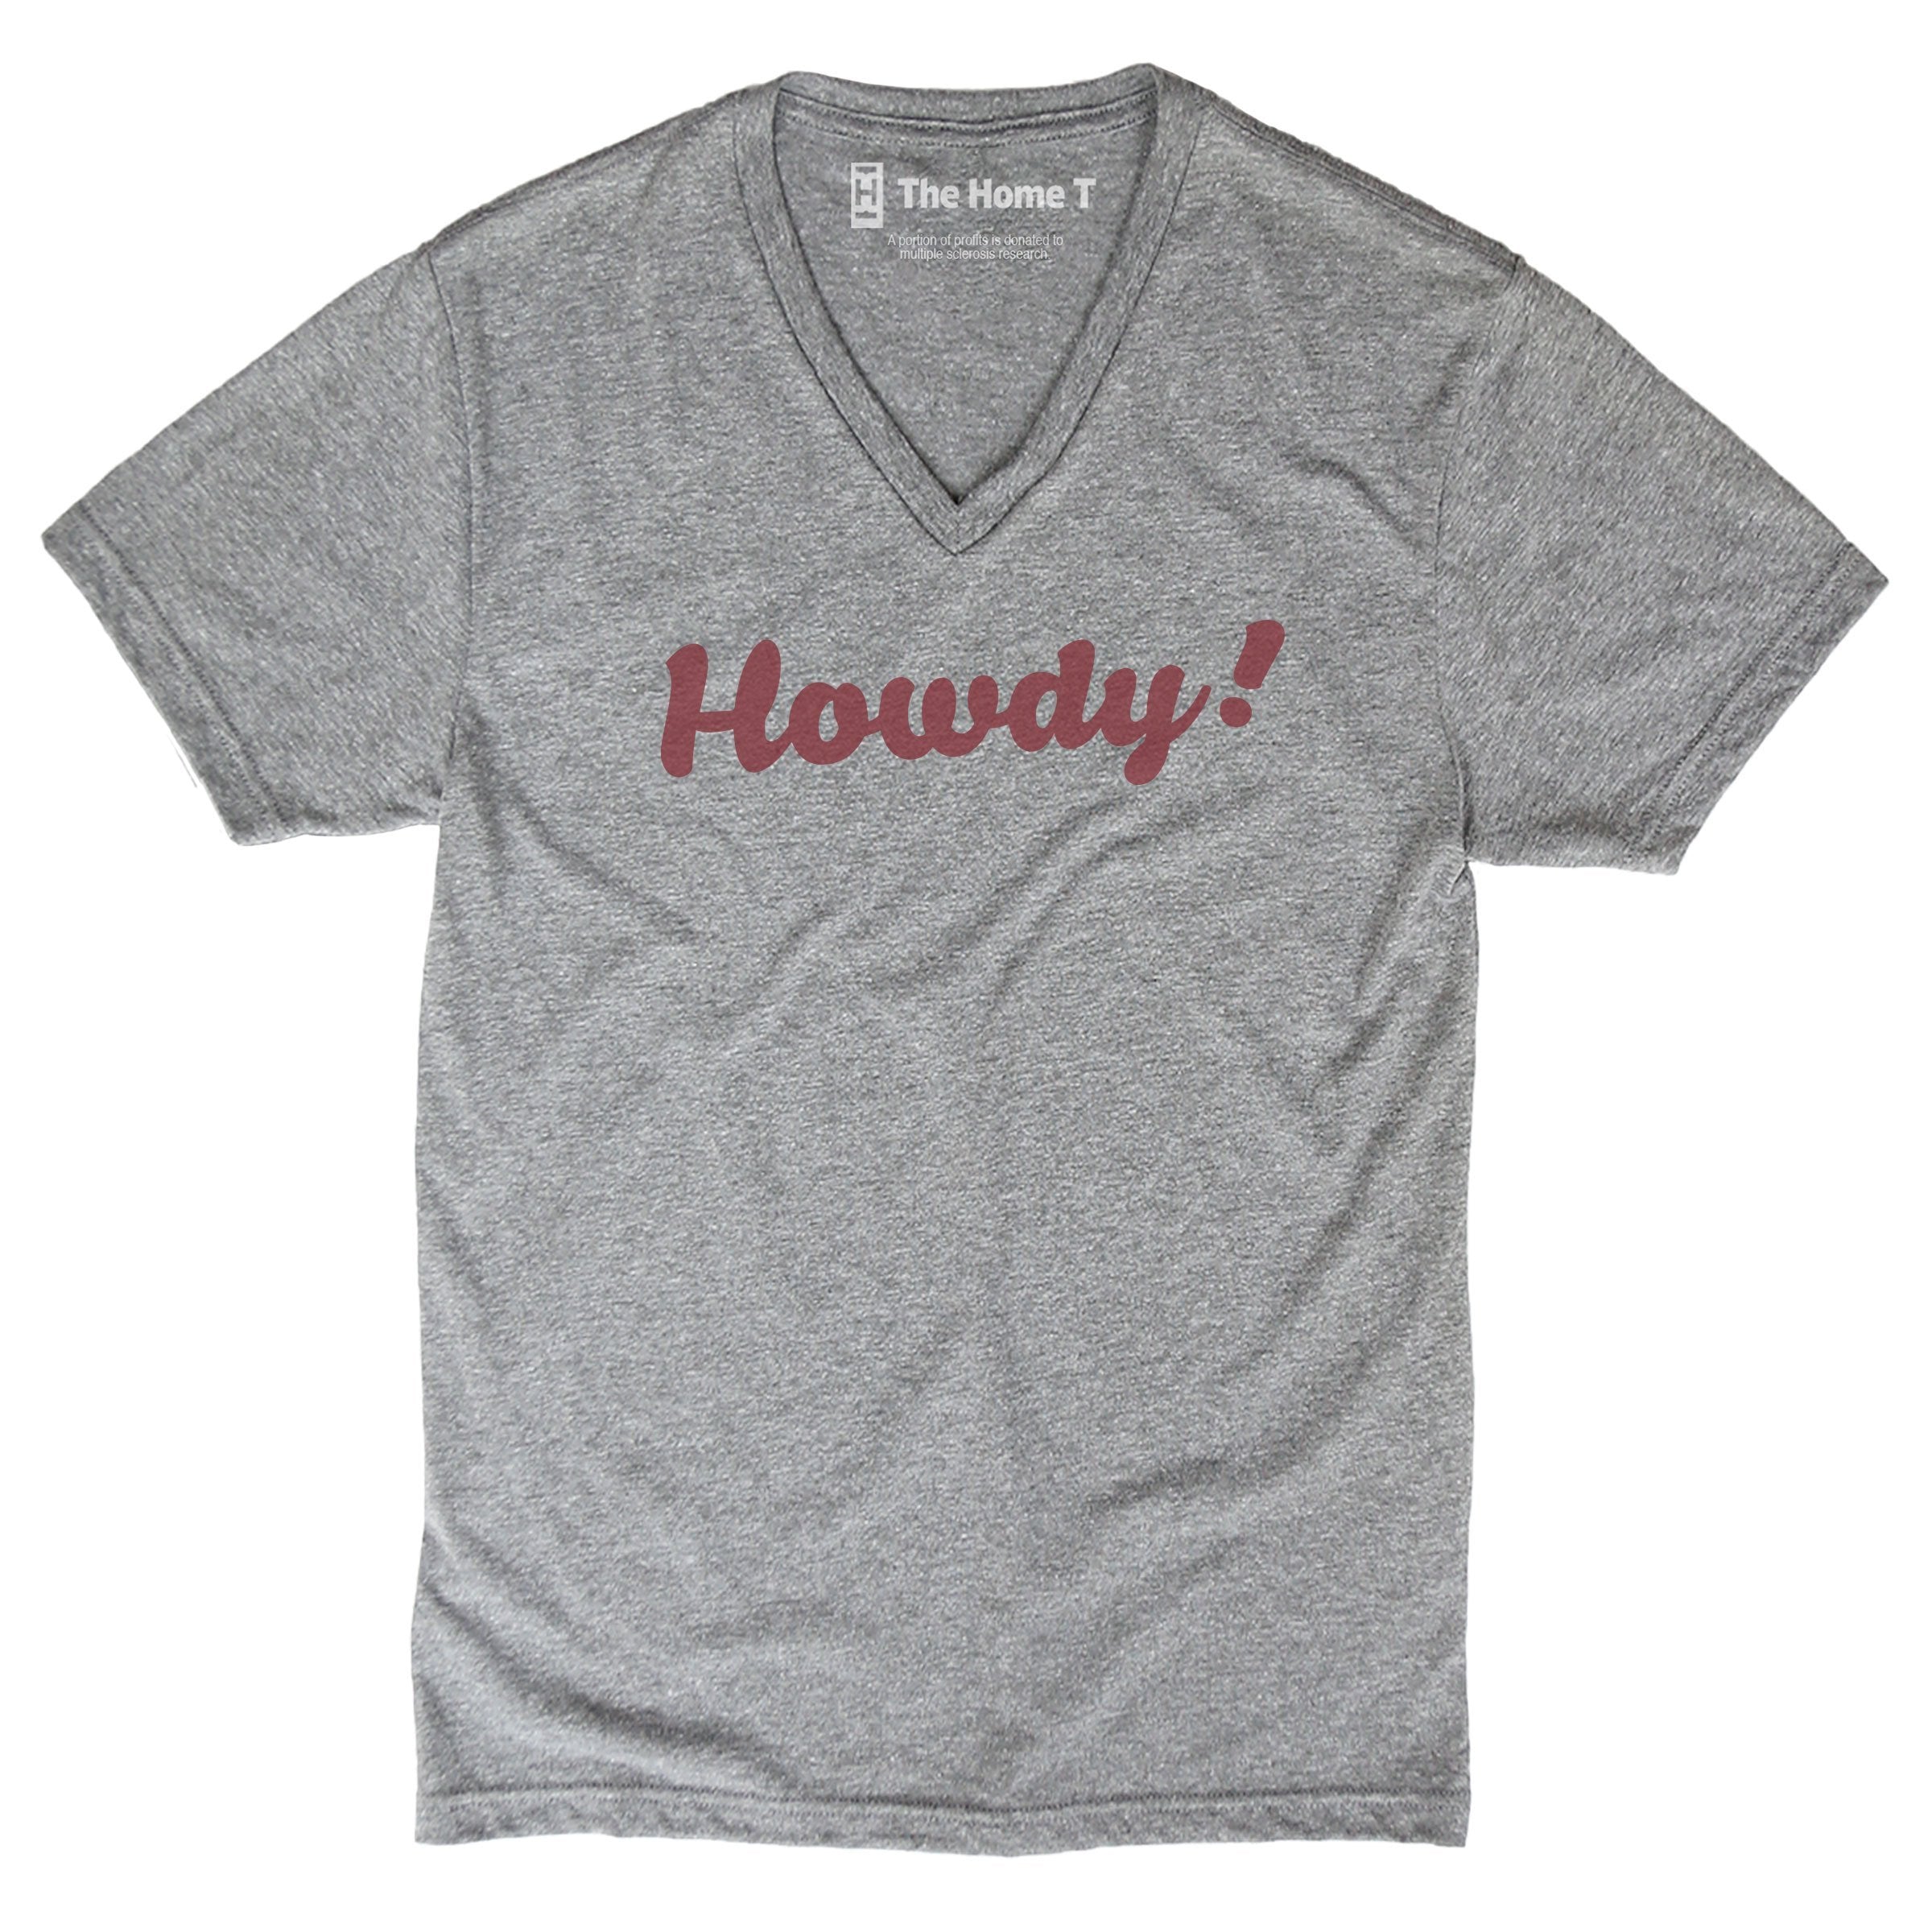 Howdy! Crew neck The Home T XS Ath Grey V-Neck T-Shirt